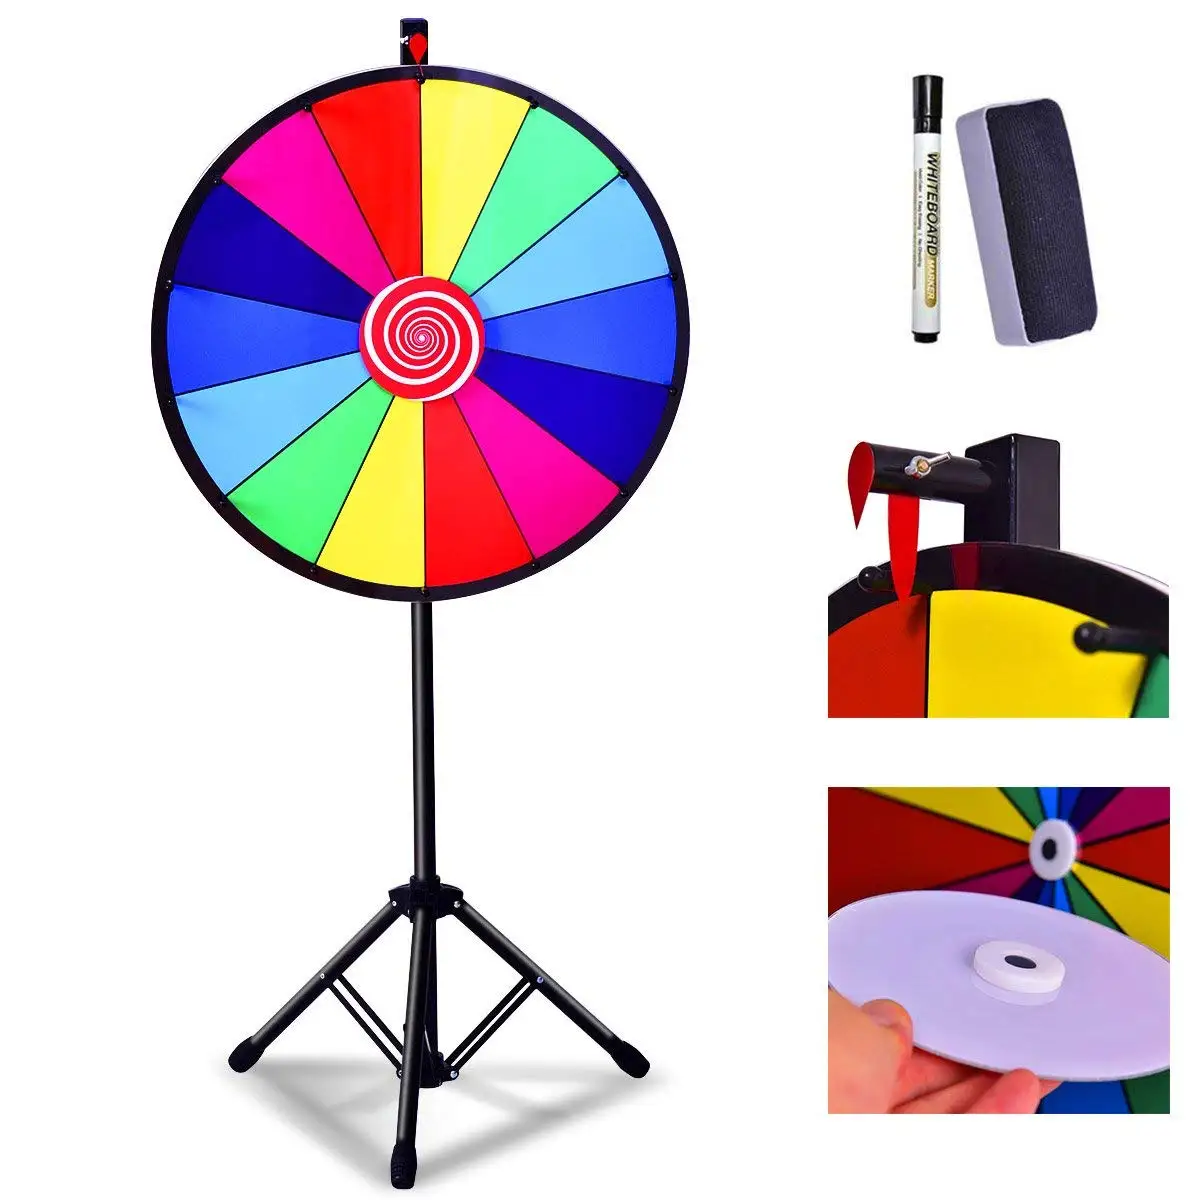 24" Green and White Promotional Dry Erase Spinning Prize Wheel 